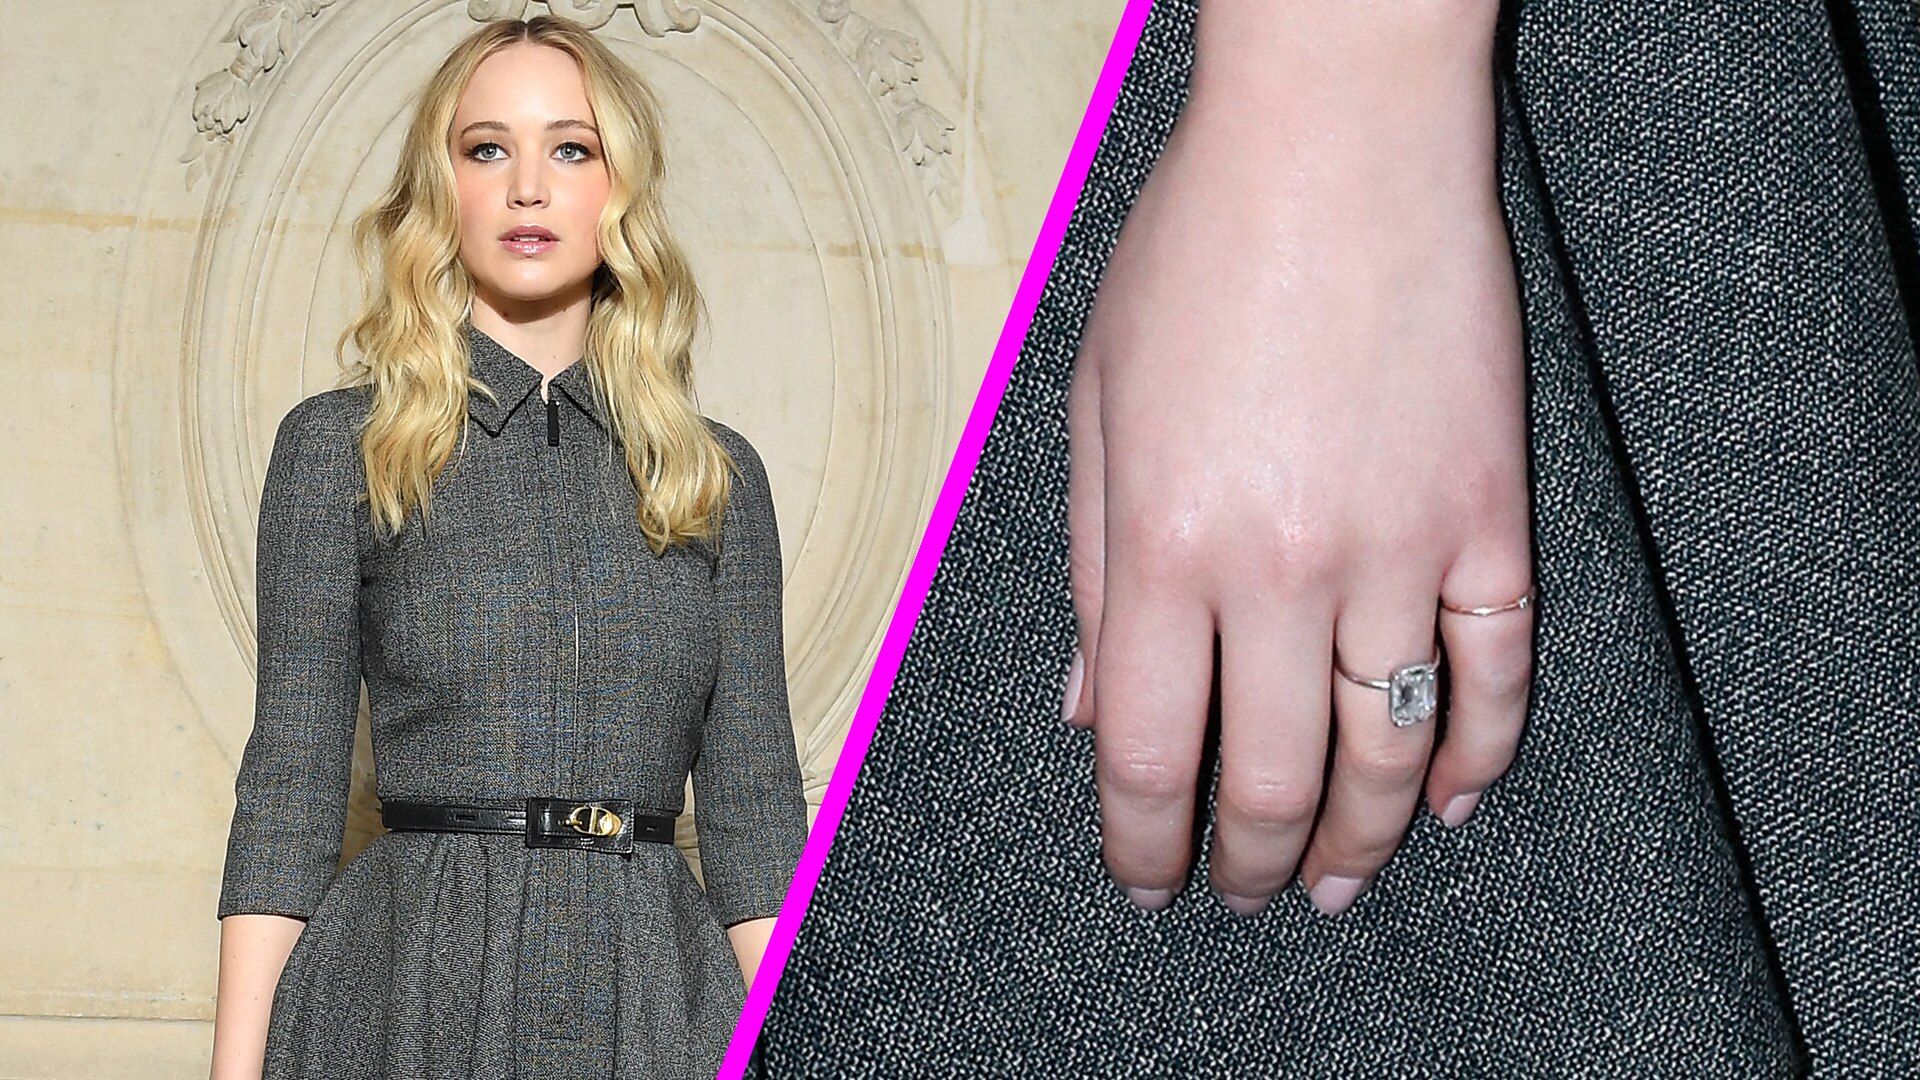 Watch Access Hollywood Interview: Jennifer Lawrence Flashes Her Huge Engagement Ring ...1920 x 1080